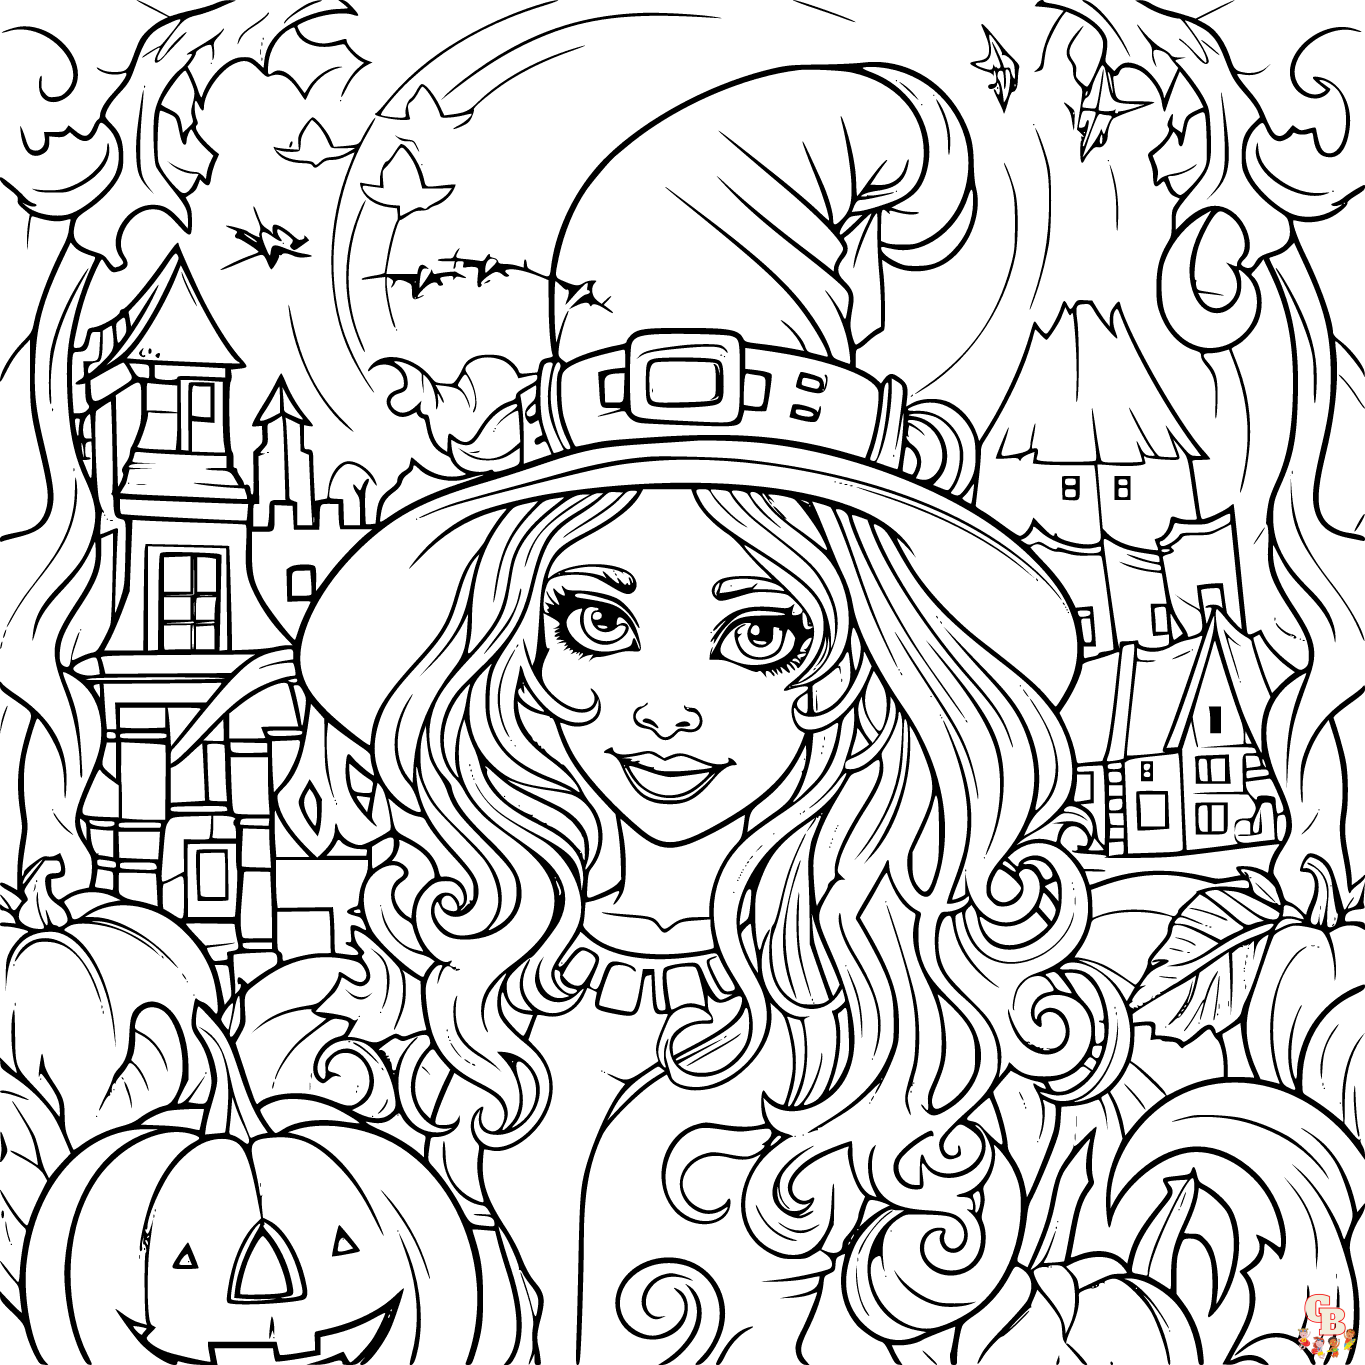 halloween printable coloring pages